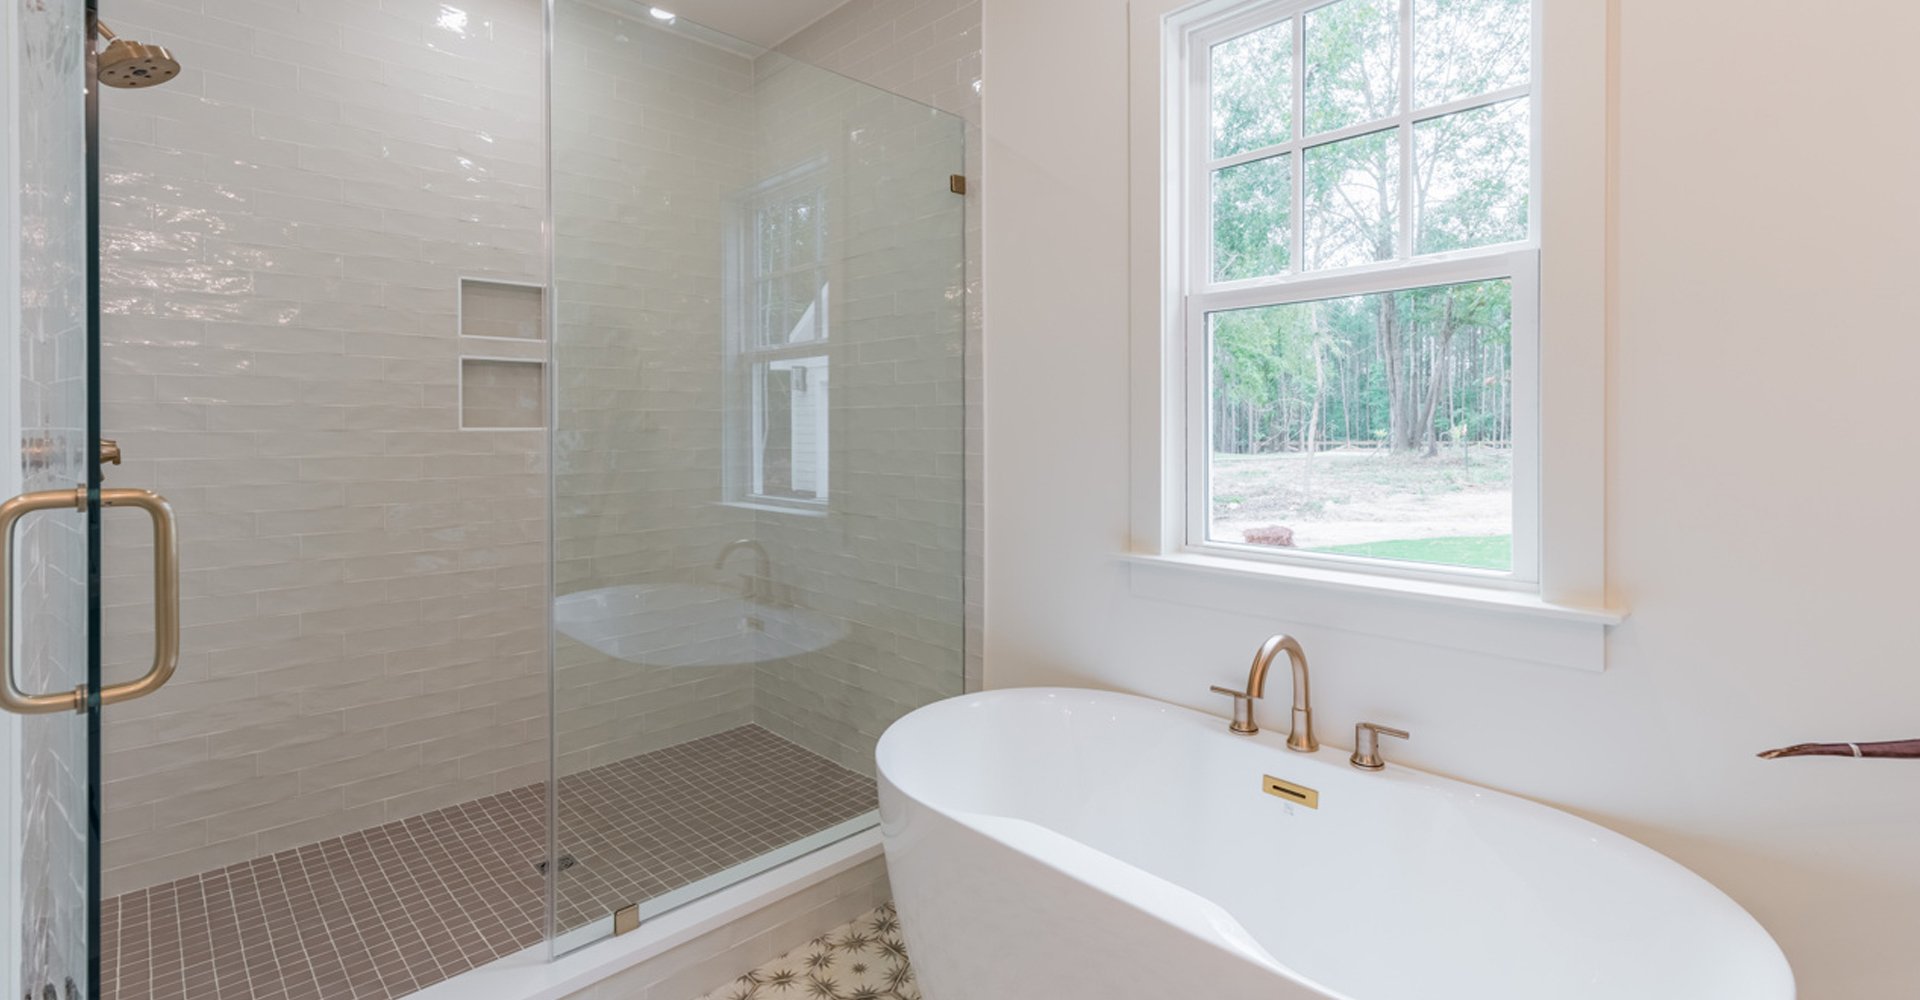 The Herschel by LaFaye Custom Homes Main Level Master Bath with Tile Shower, Freestanding Tub Set under Window, Enclosed Water Closet & Double Vanity